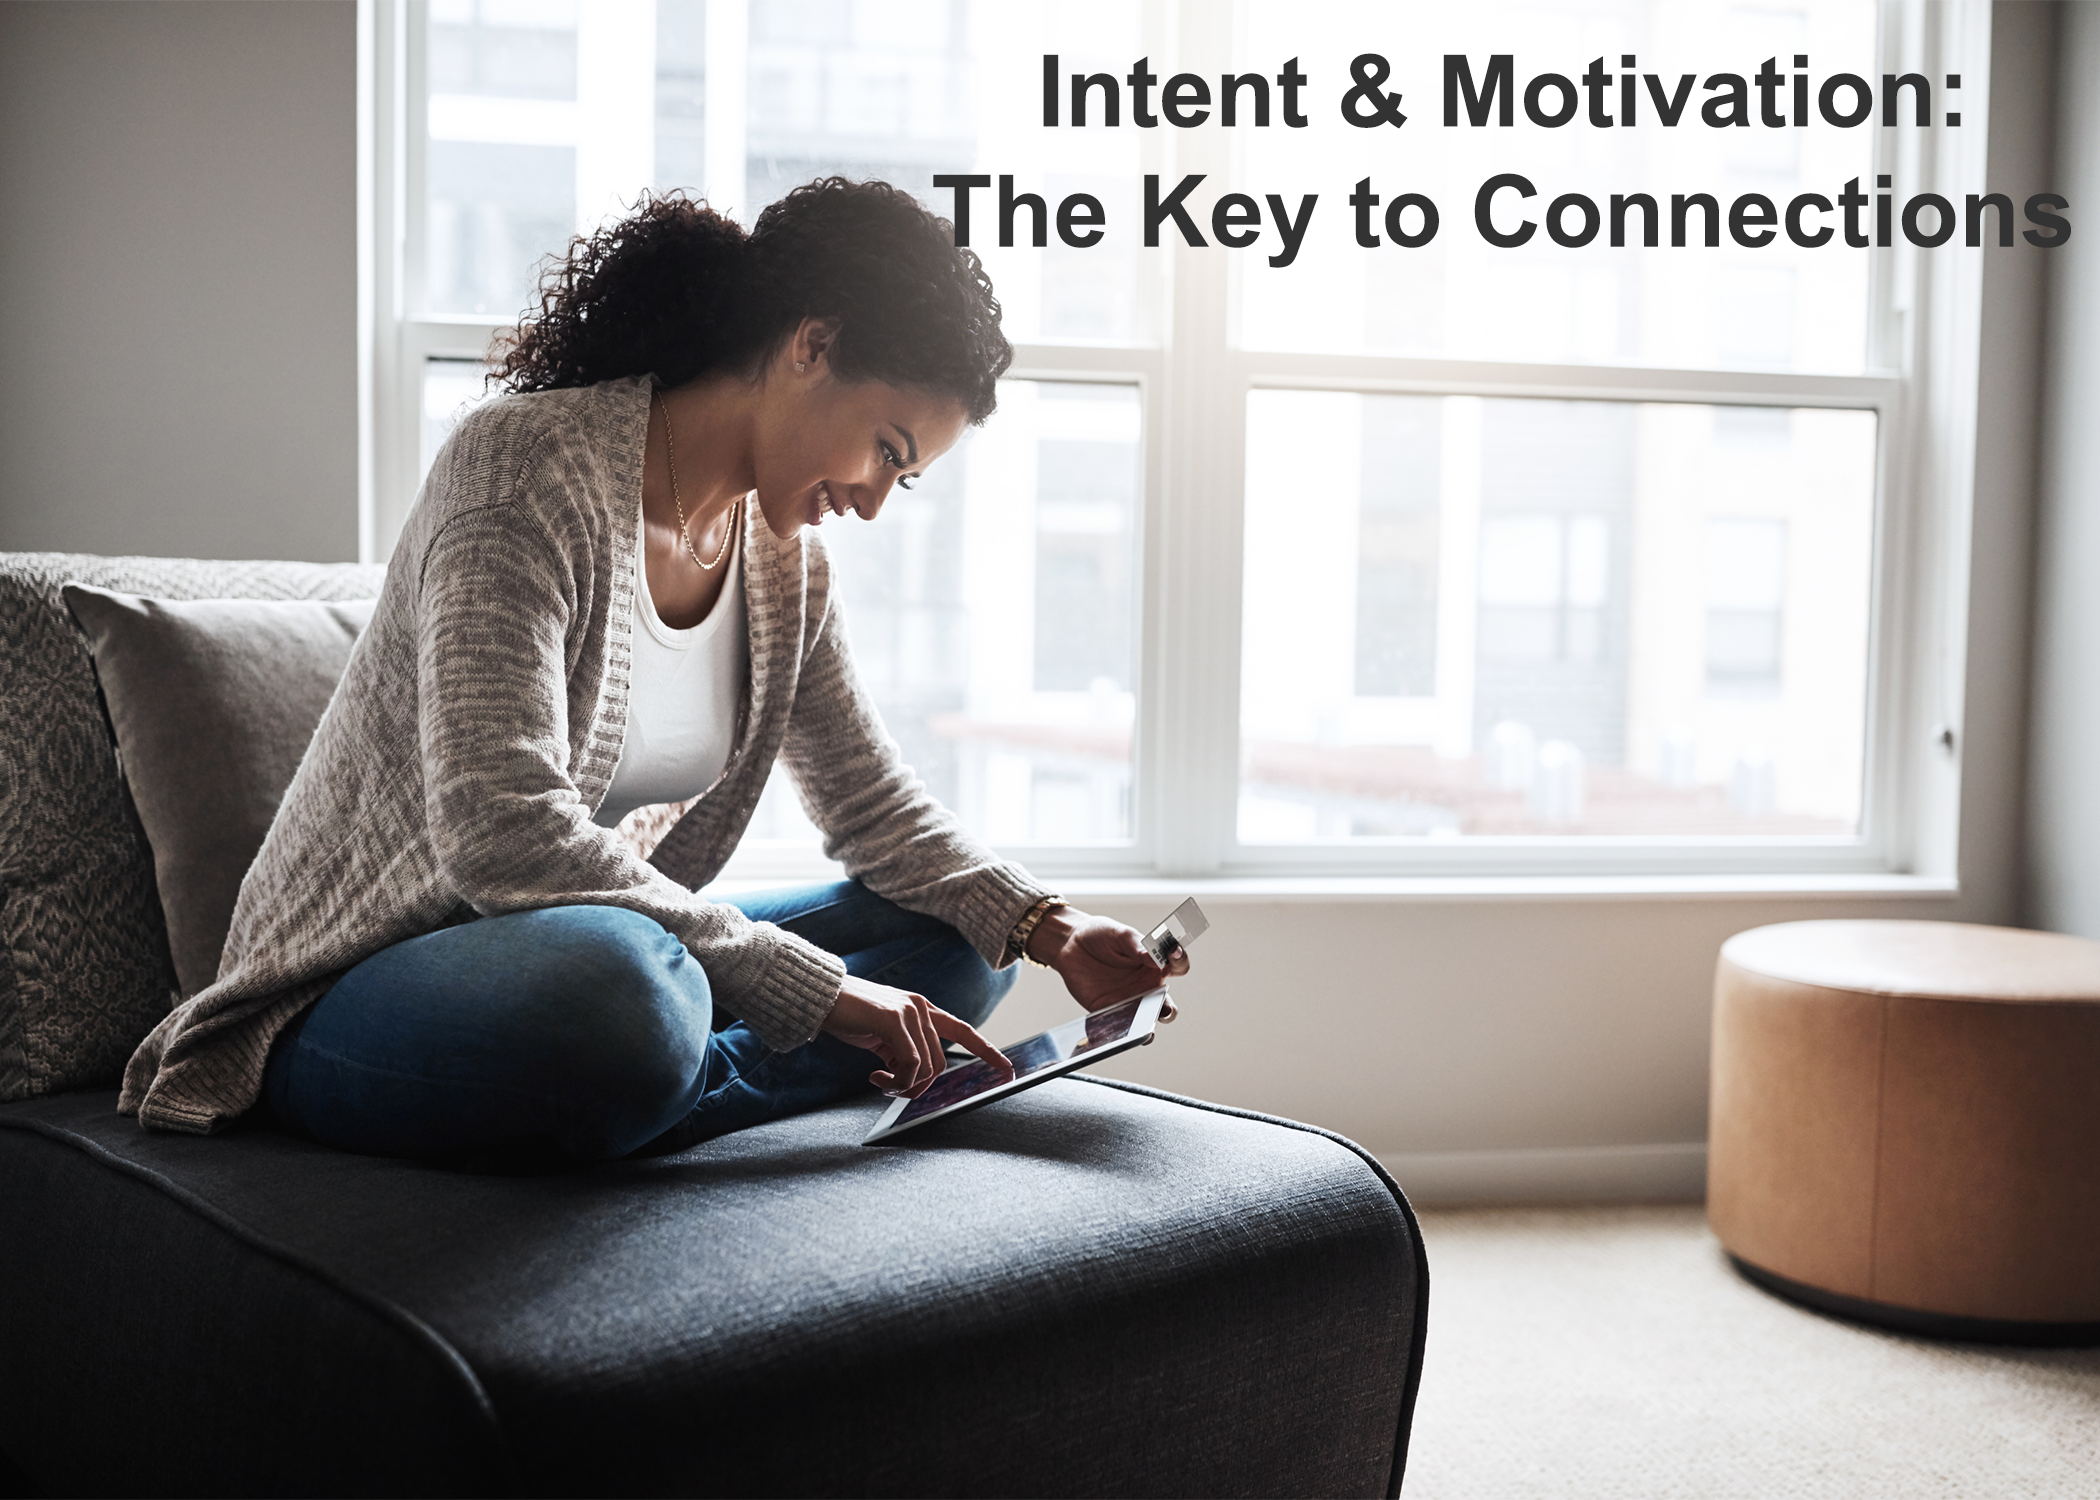 Intent & Motivation: The Key to Connections